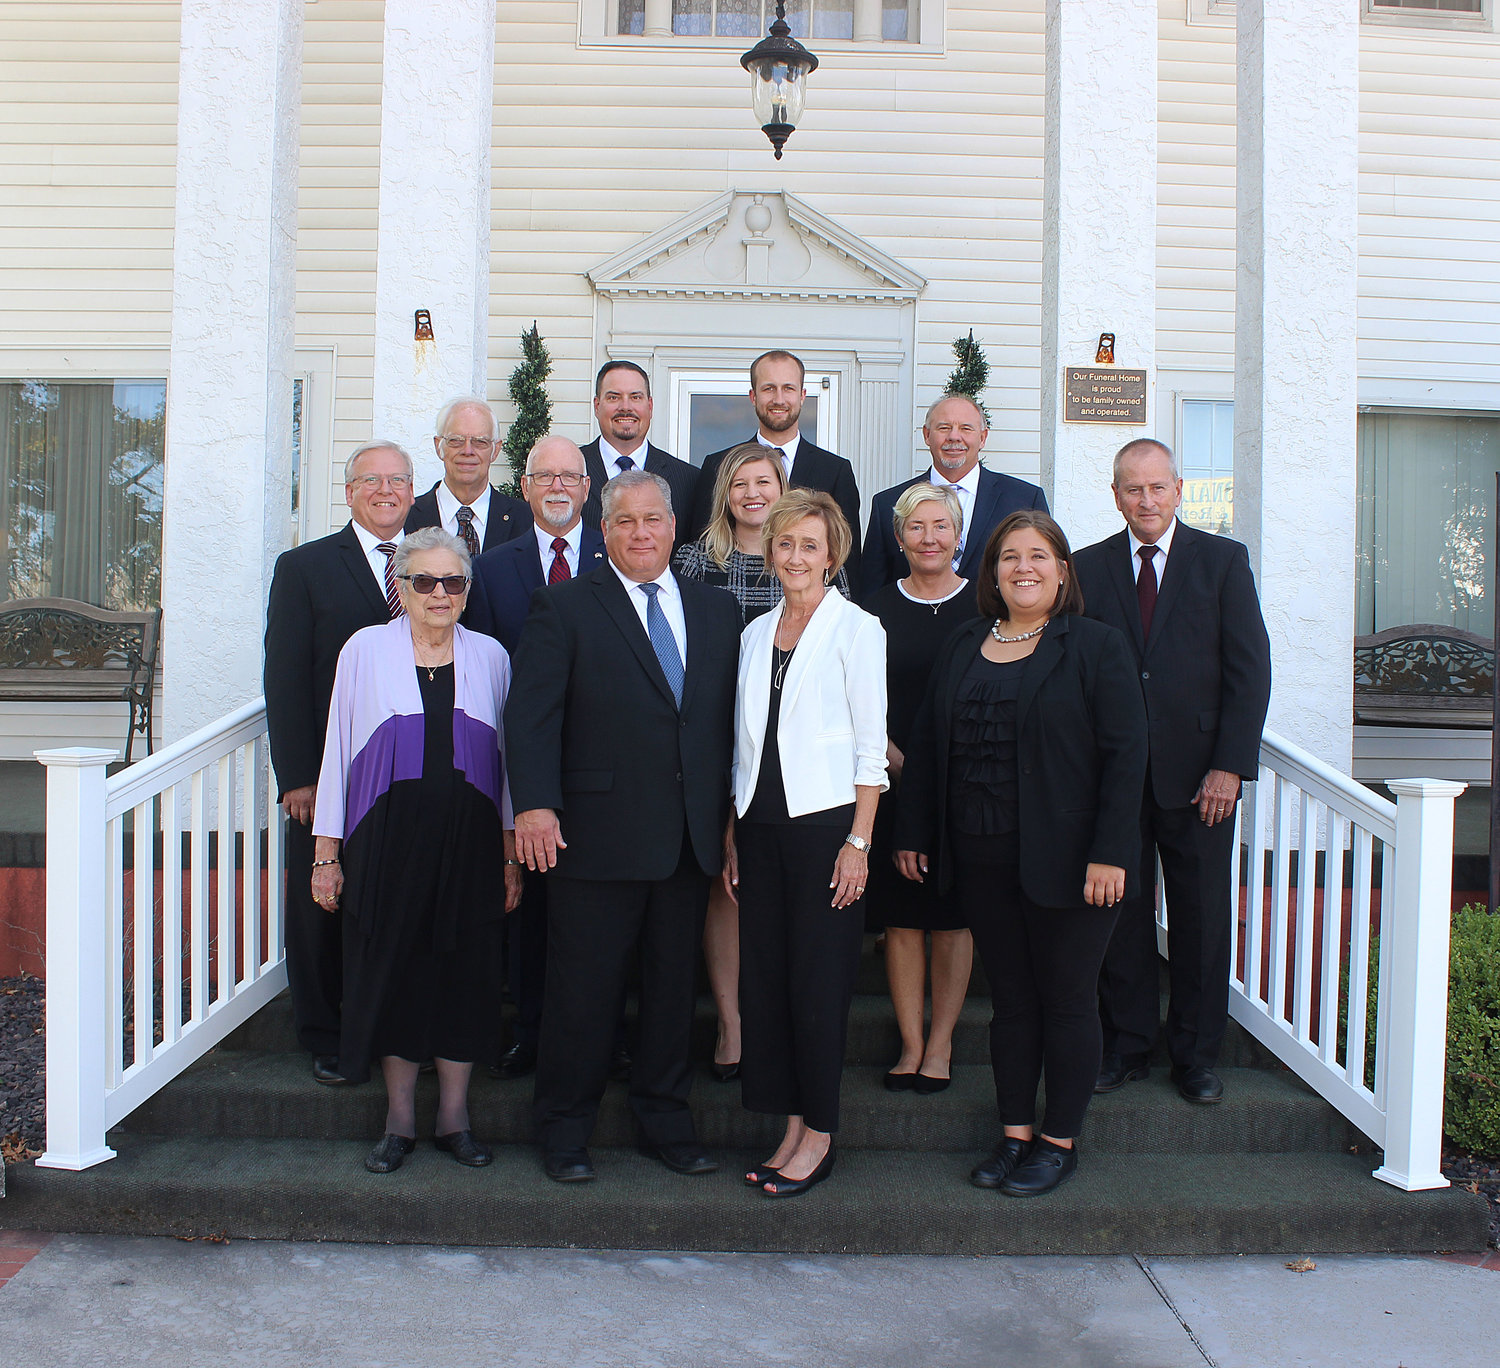 The staff of the now expanded Craig-Hurtt Funeral Home. Front row, from left: Maxona Lawler, Office Manager; Ben Hurtt, Funeral Director/Embalmer; Rhonda Hurtt, Owner/Funeral Director; and Mattie Adams, Funeral Director/Embalmer. Second row: Rick Bruffett, Funeral Director; Ray Bradley, Funeral Director/Embalmer; Amanda Hurtt, Office Manager/HR; Angela Miller, Funeral Director/Embalmer; and John Miller, Funeral Director/Embalmer. Third row: Bob Crump, Funeral Assistant; Jared Moore, Funeral Director/Embalmer; Zach Hurtt, Funeral Director/Embalmer; and Allen Dickison, Funeral Assistant. Not pictured: Jan Fugitt, Office Manager.